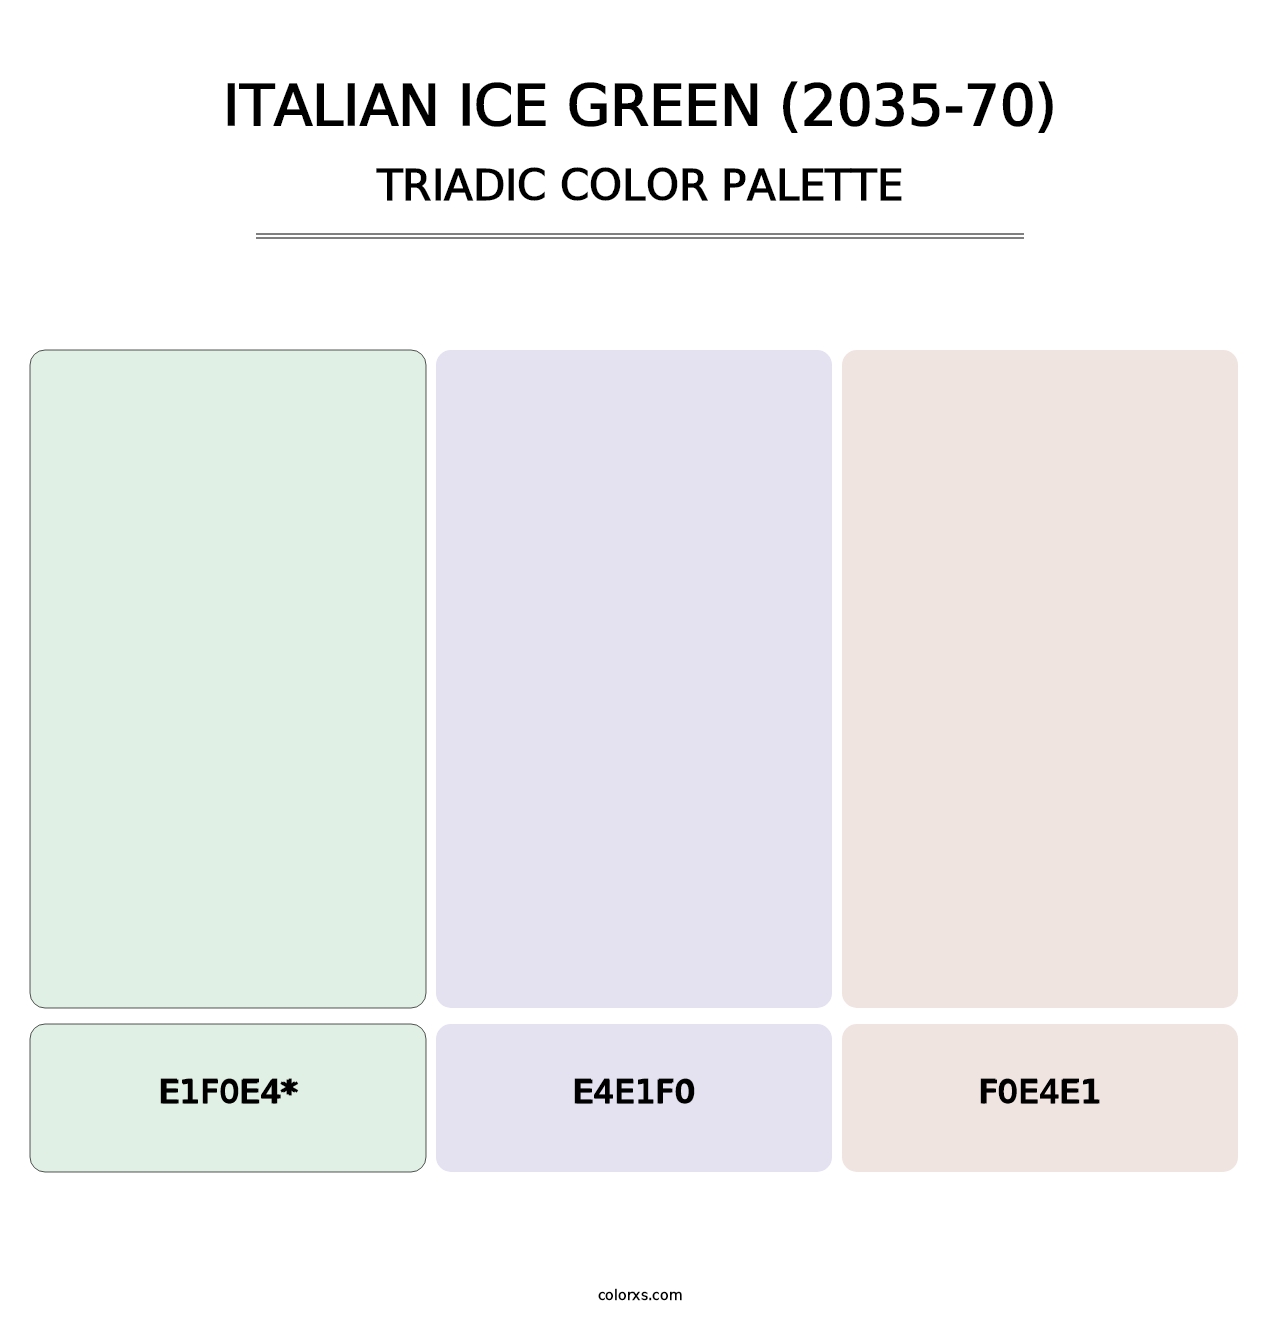 Italian Ice Green (2035-70) - Triadic Color Palette